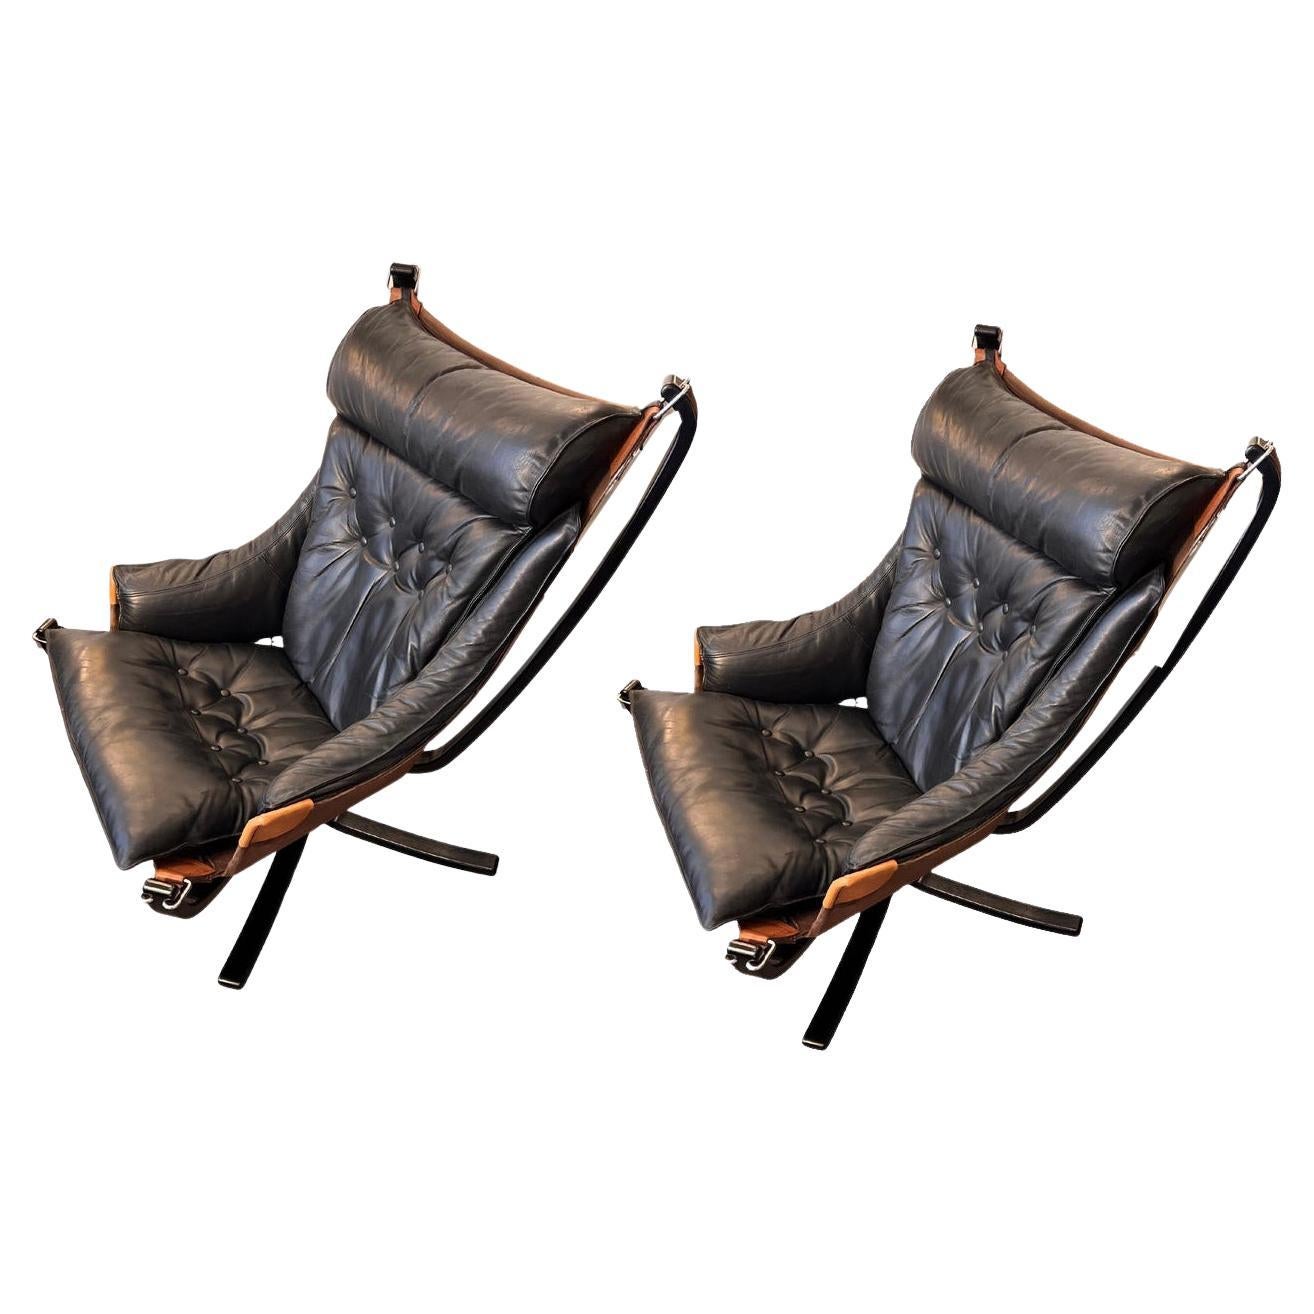 Pair of Armchairs by Poltrona Frau 1960s, "Falcon" Model For Sale